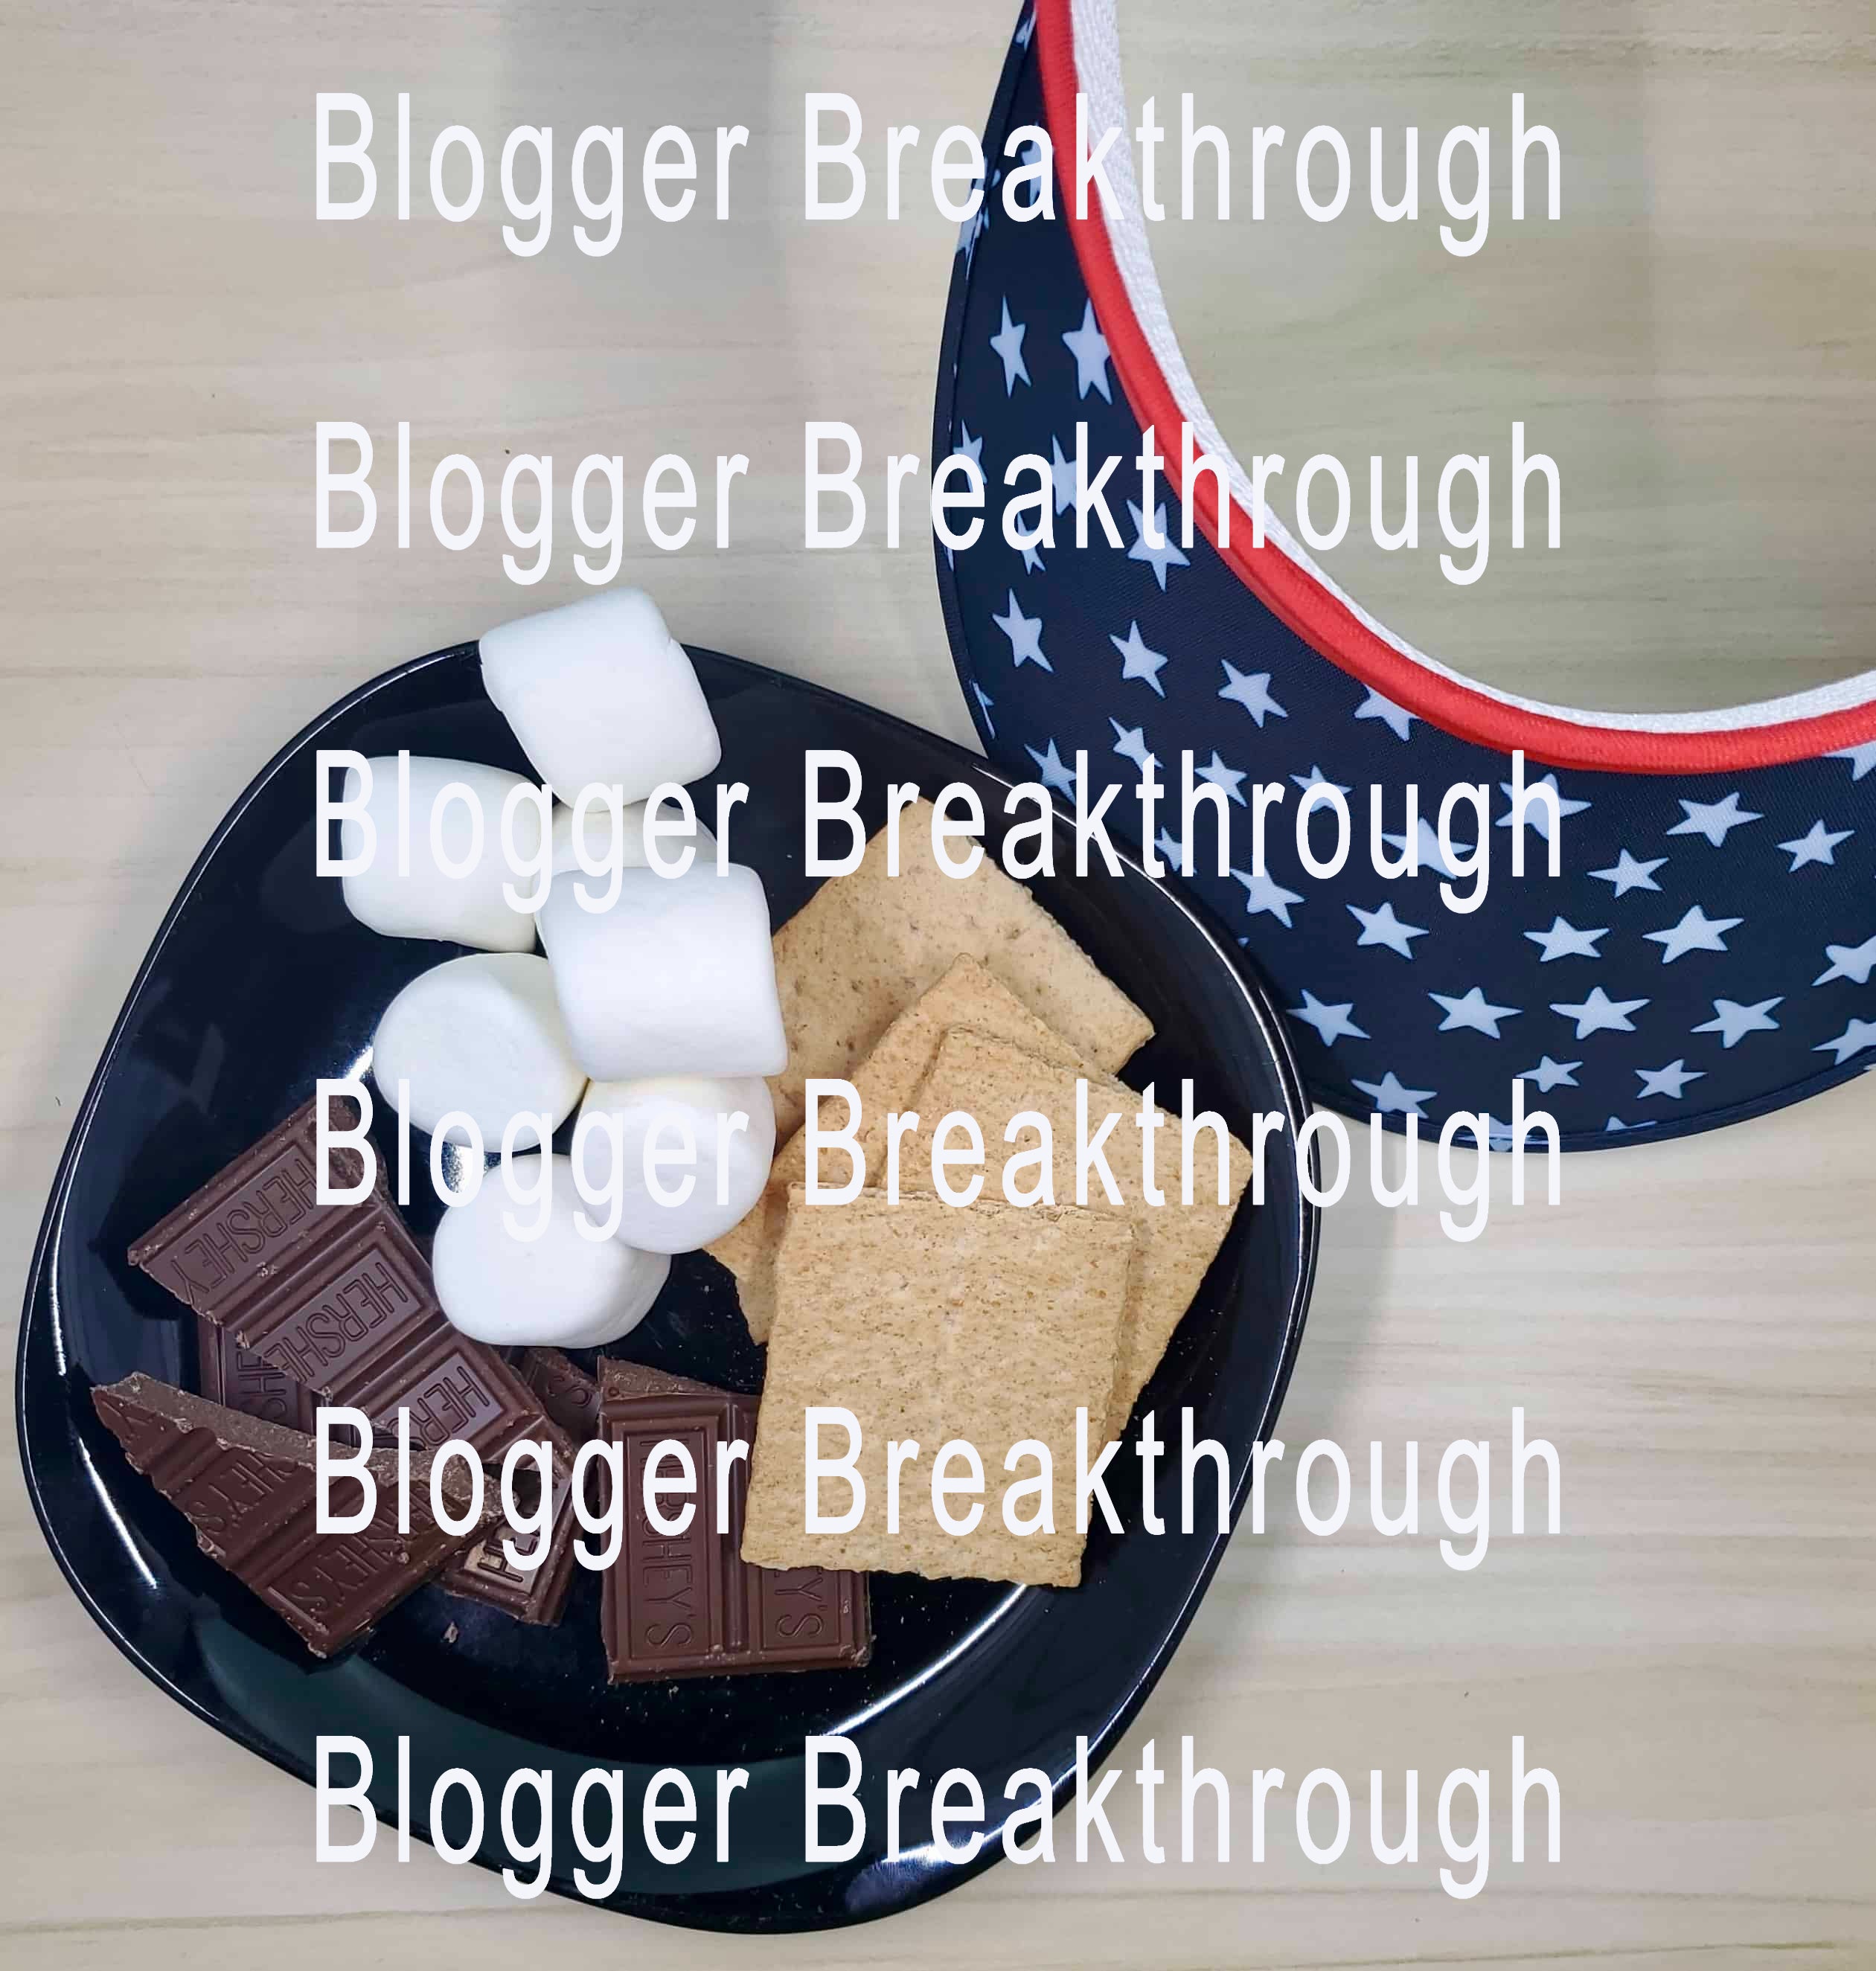 A plate with chocolate bars, biscuits, and marshmallows next to a Blogger Breakthrough Summit Summer Themed Stock Photos (set of 10) hat is perfect for making your blog stand out.